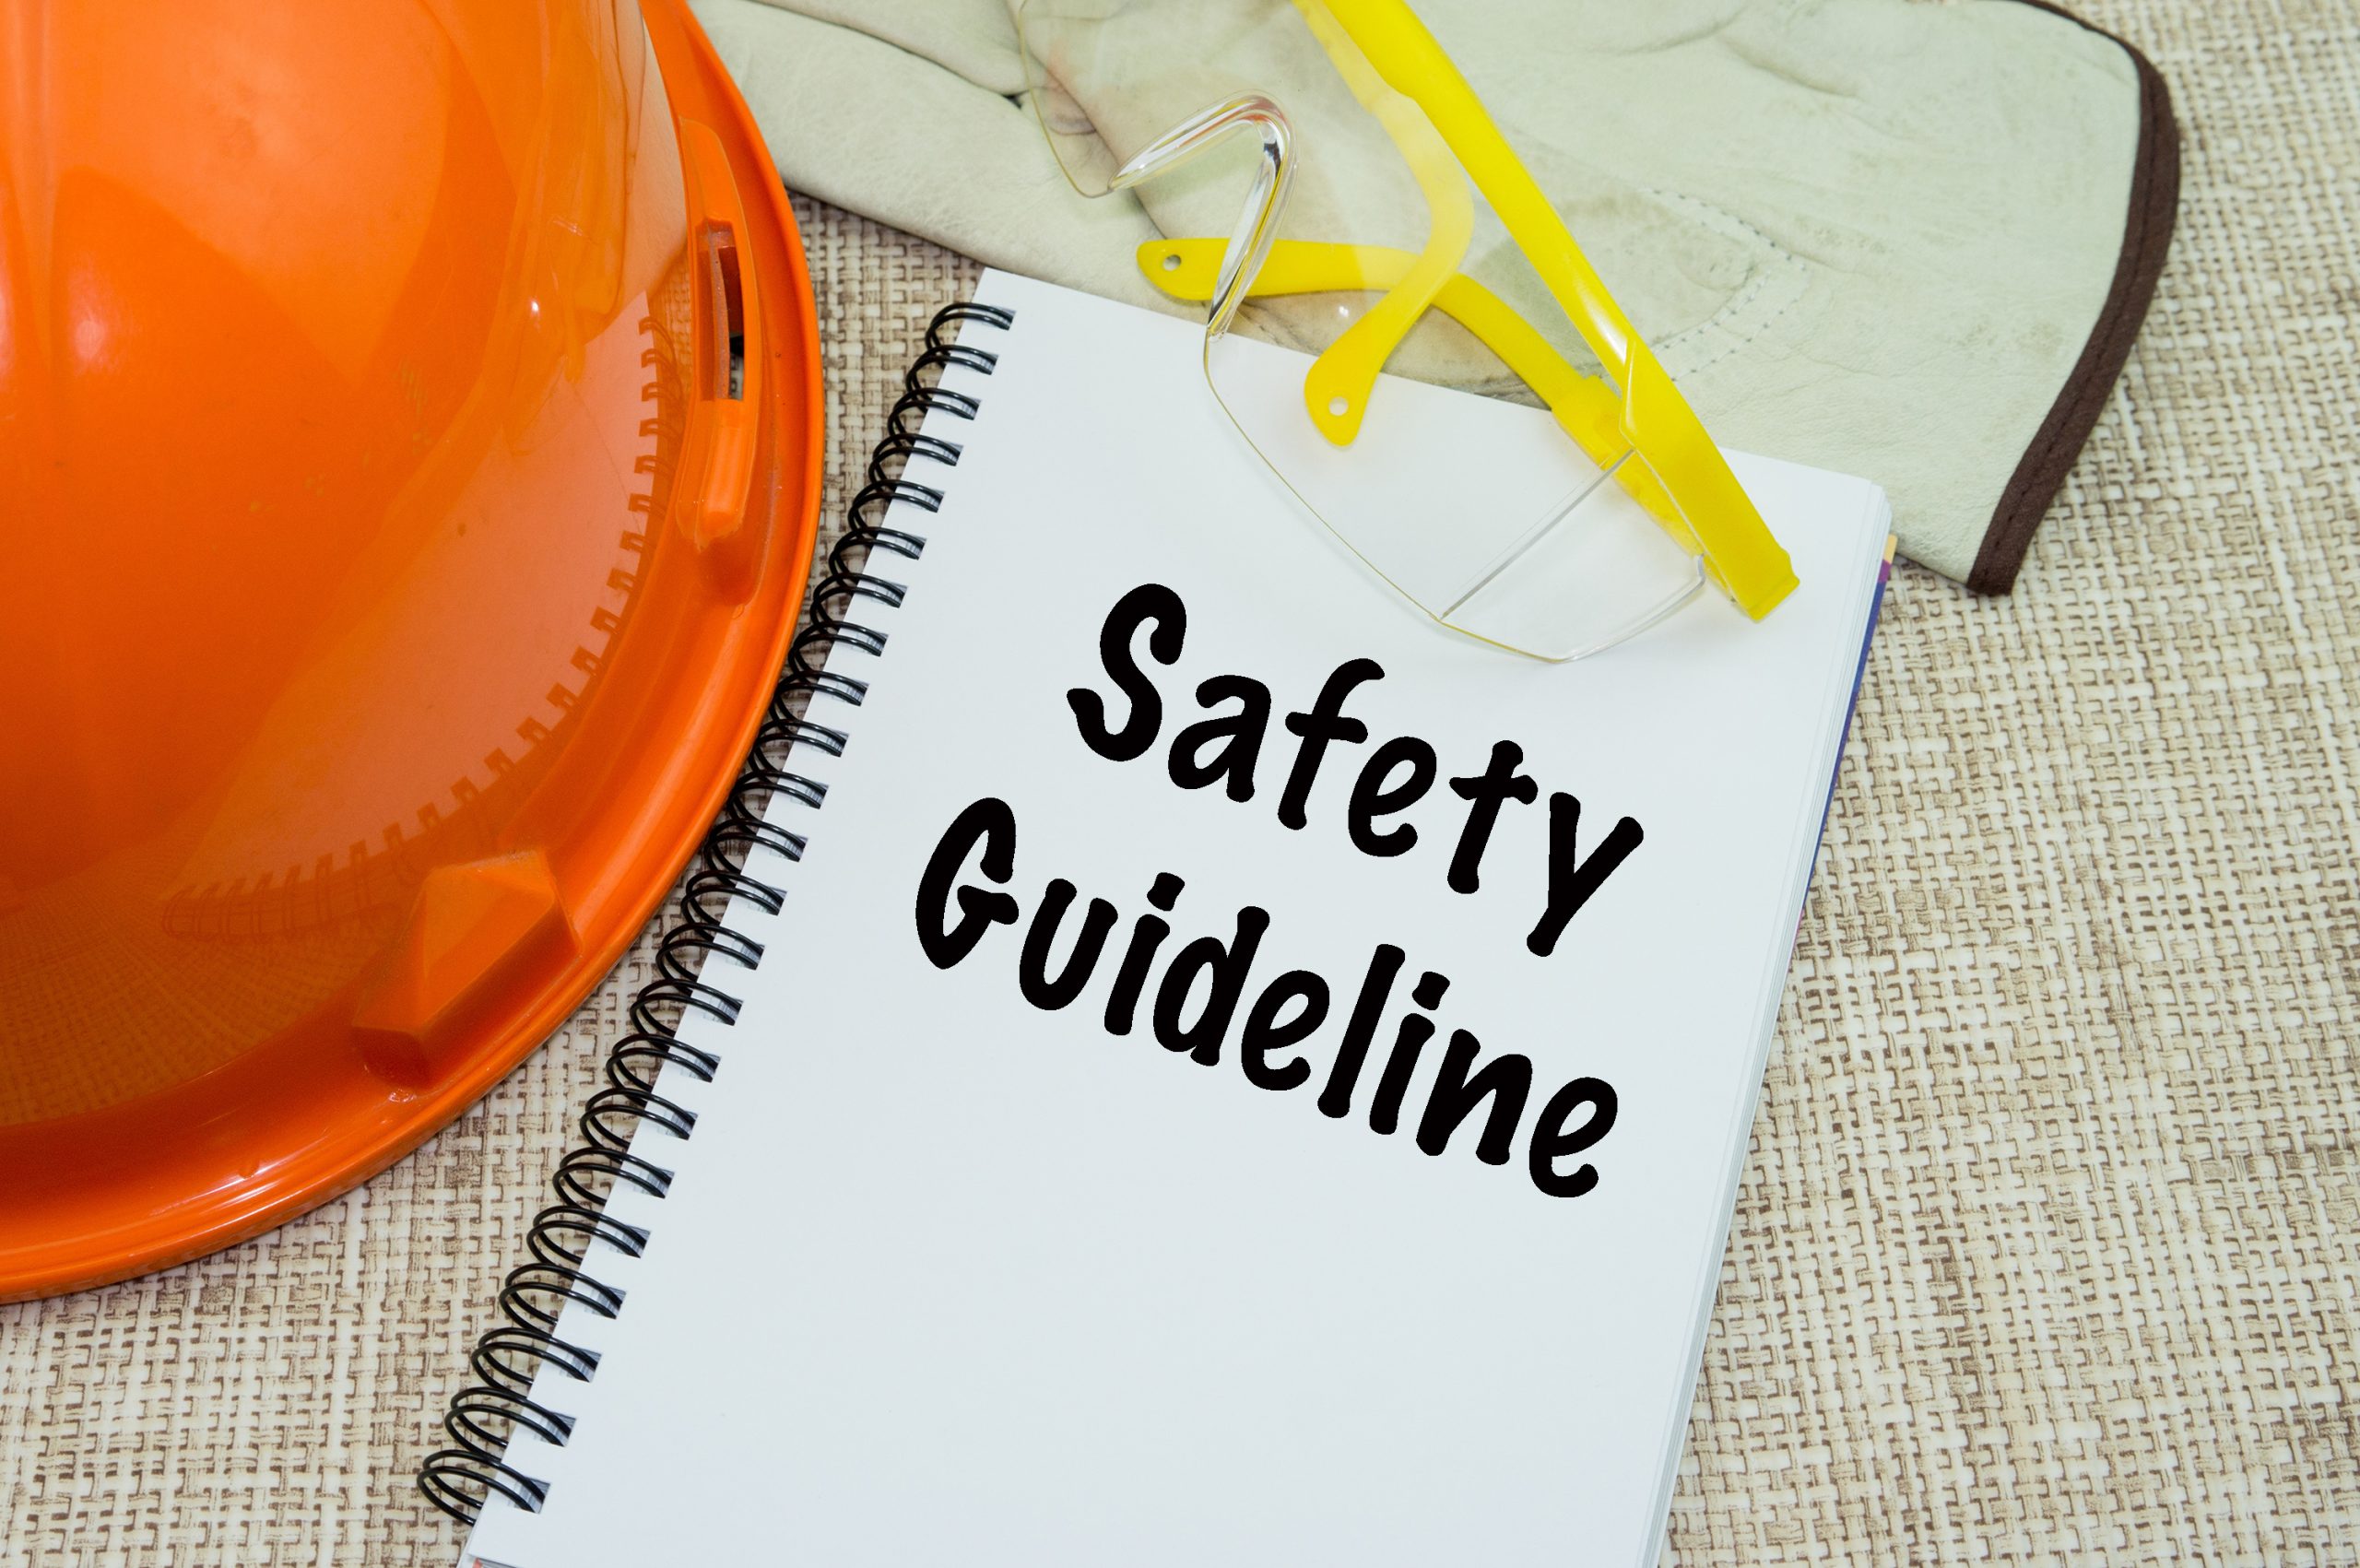 HSE guidelines document